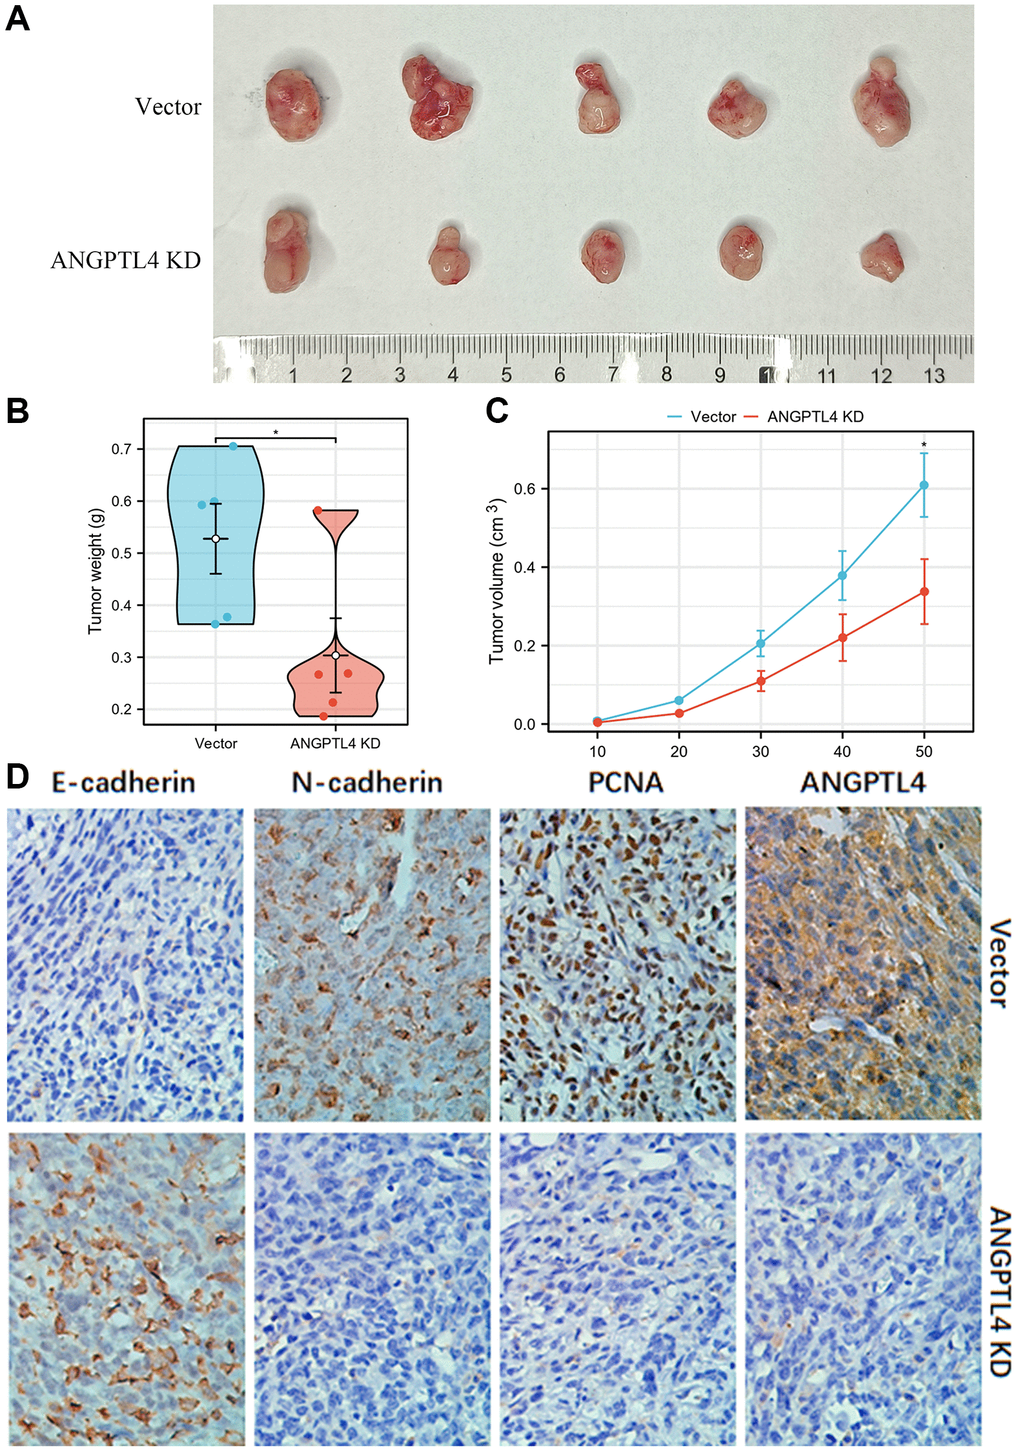 The effect of ANGPTL4 on LUAD cell growth in vivo. (A) The effects of ANGPTL4 shRNA lentivirus plasmid transfection or empty vector lentivirus plasmid transfection on A549 growth in vivo. The tumor weight (B) and volume (C) of the xenografts in ANGPTL4 KD group and vector group. (D) IHC staining for E-cadherin, N-cadherin, PCNA and ANGPTL4 in these xenografts for confirming the effects of ANGPTL4 on LUAD EMT cascade and proliferation. *P 